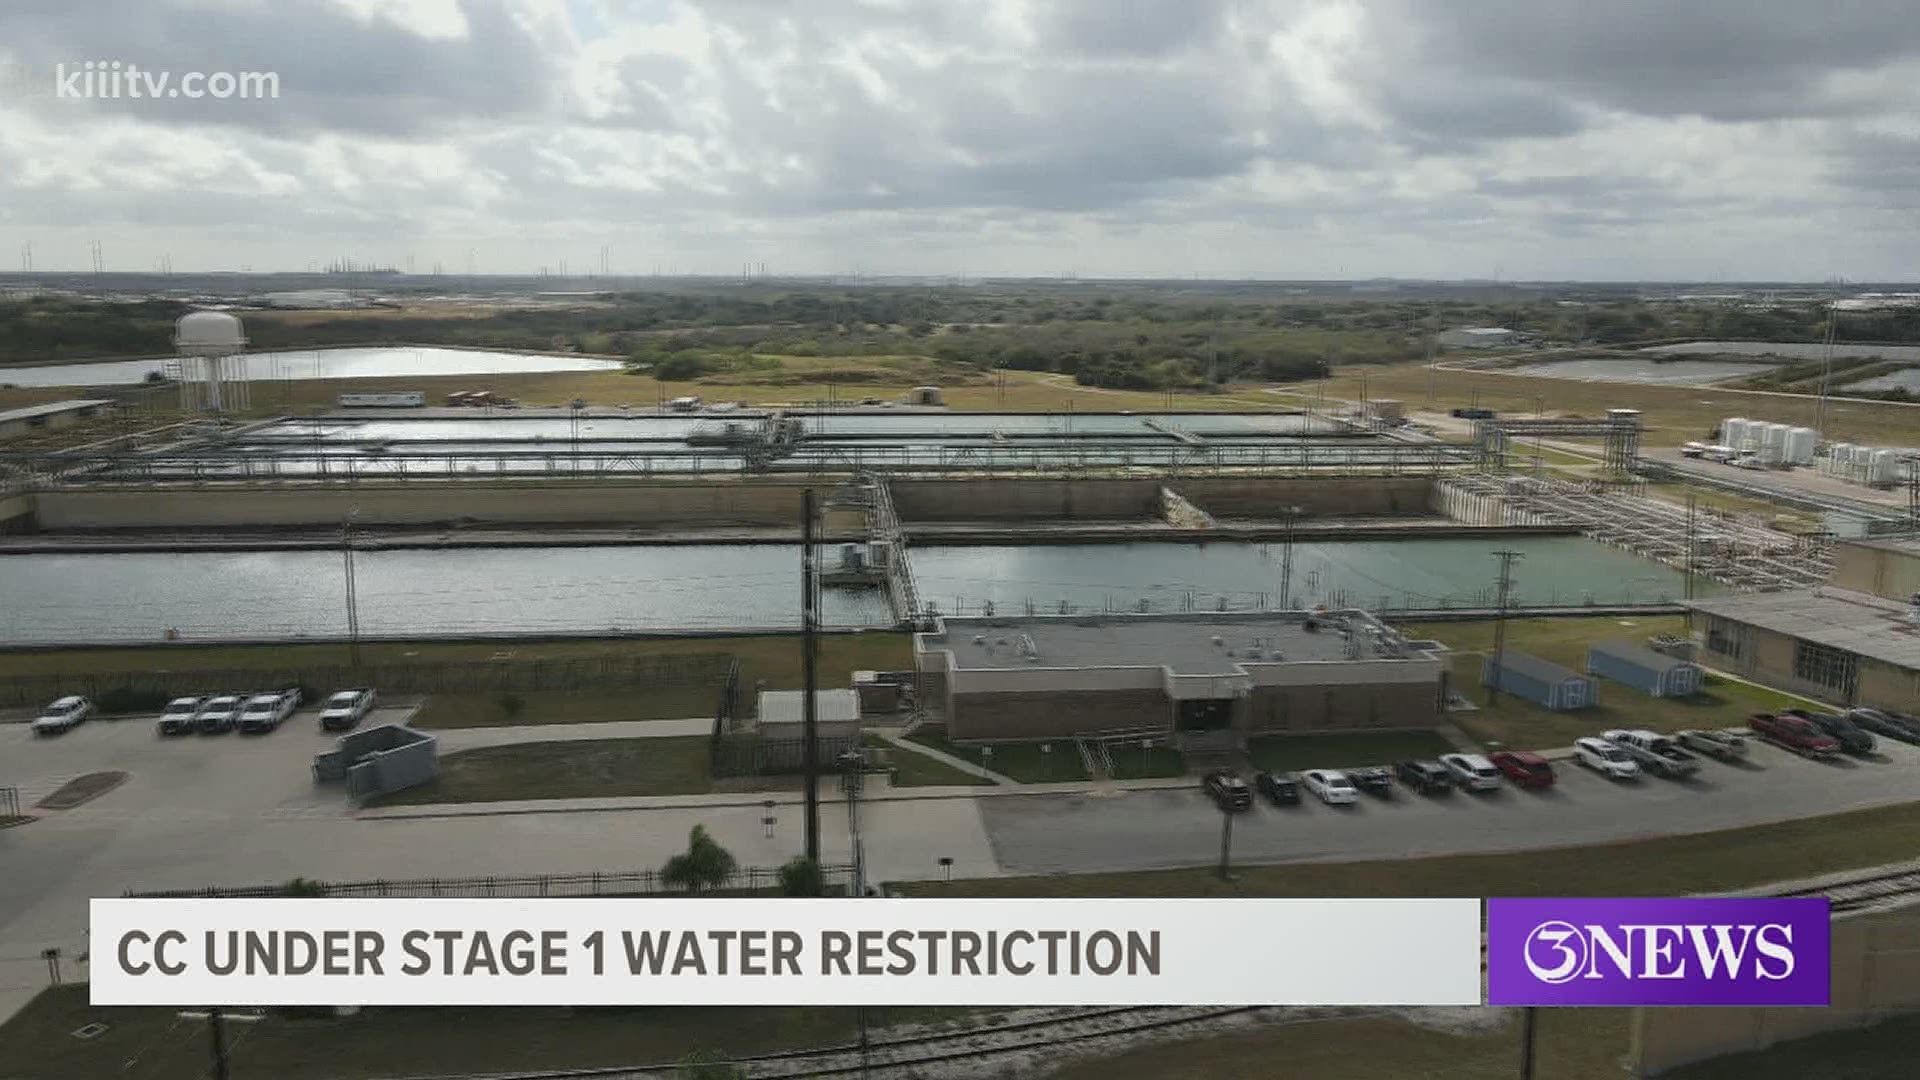 The City of Corpus Christi held a news conference to brief the public on the City’s combined lake levels.